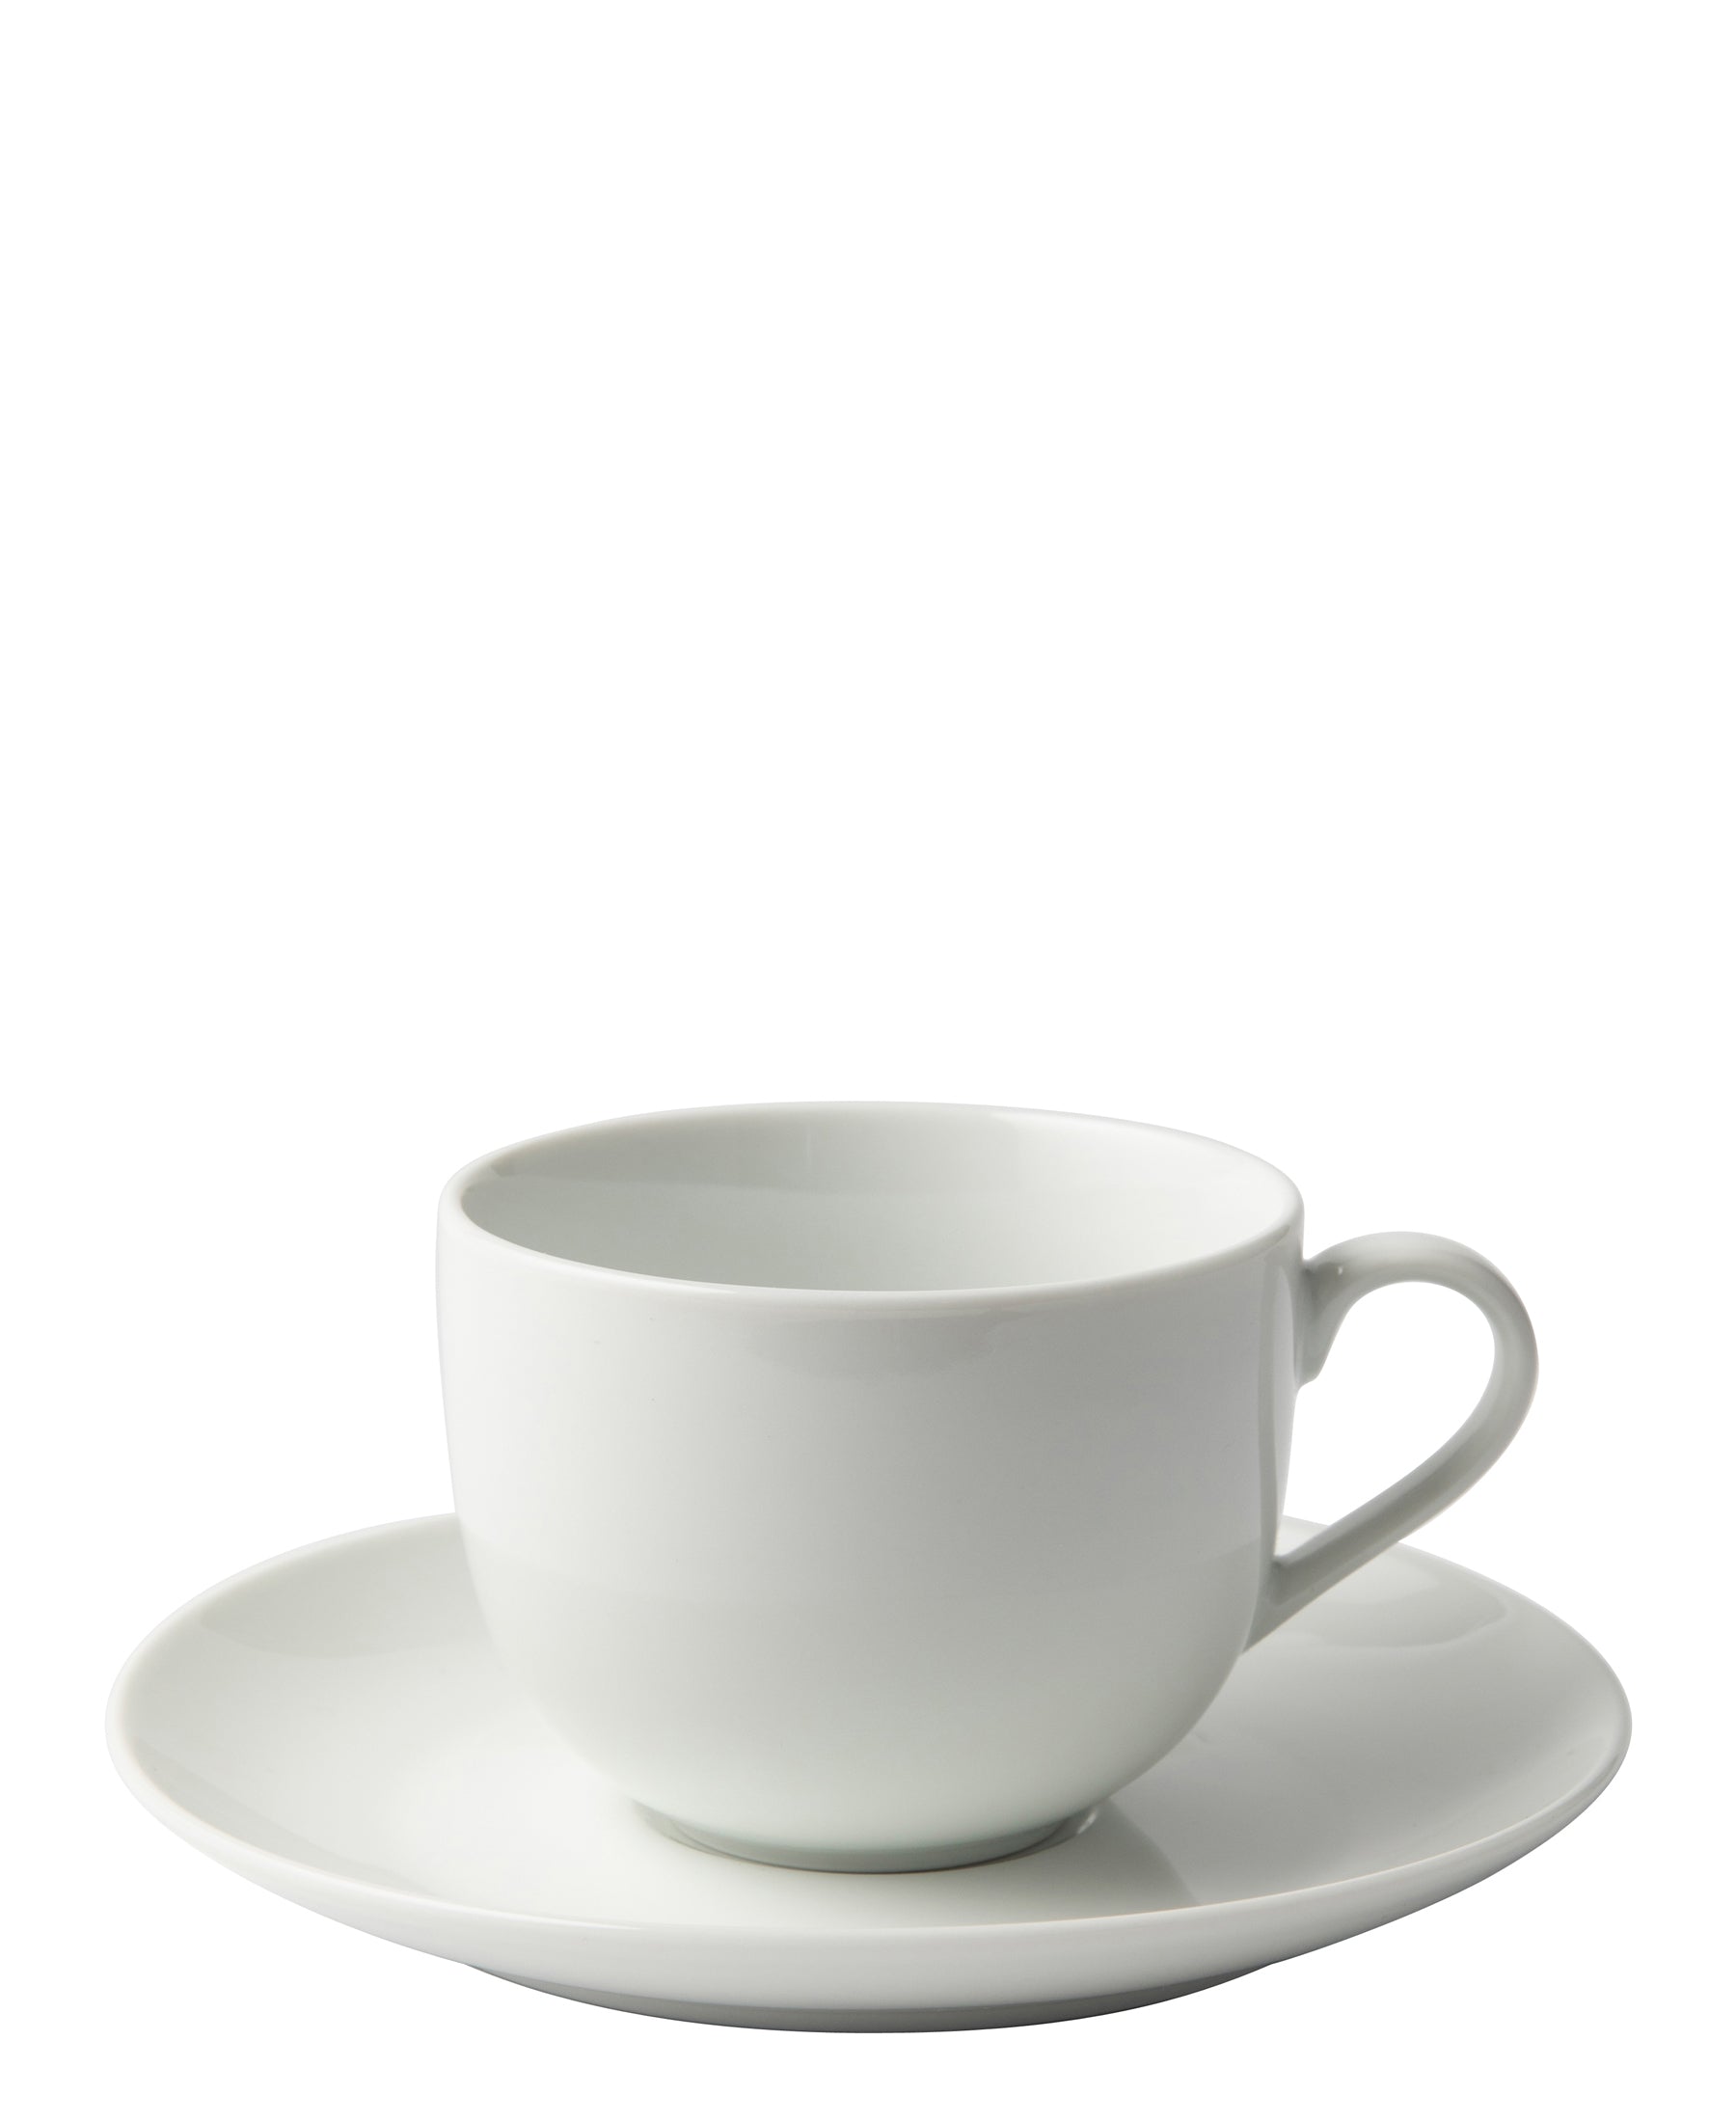 Jenna Clifford Galateo Coupe Cup & Saucer - Super White